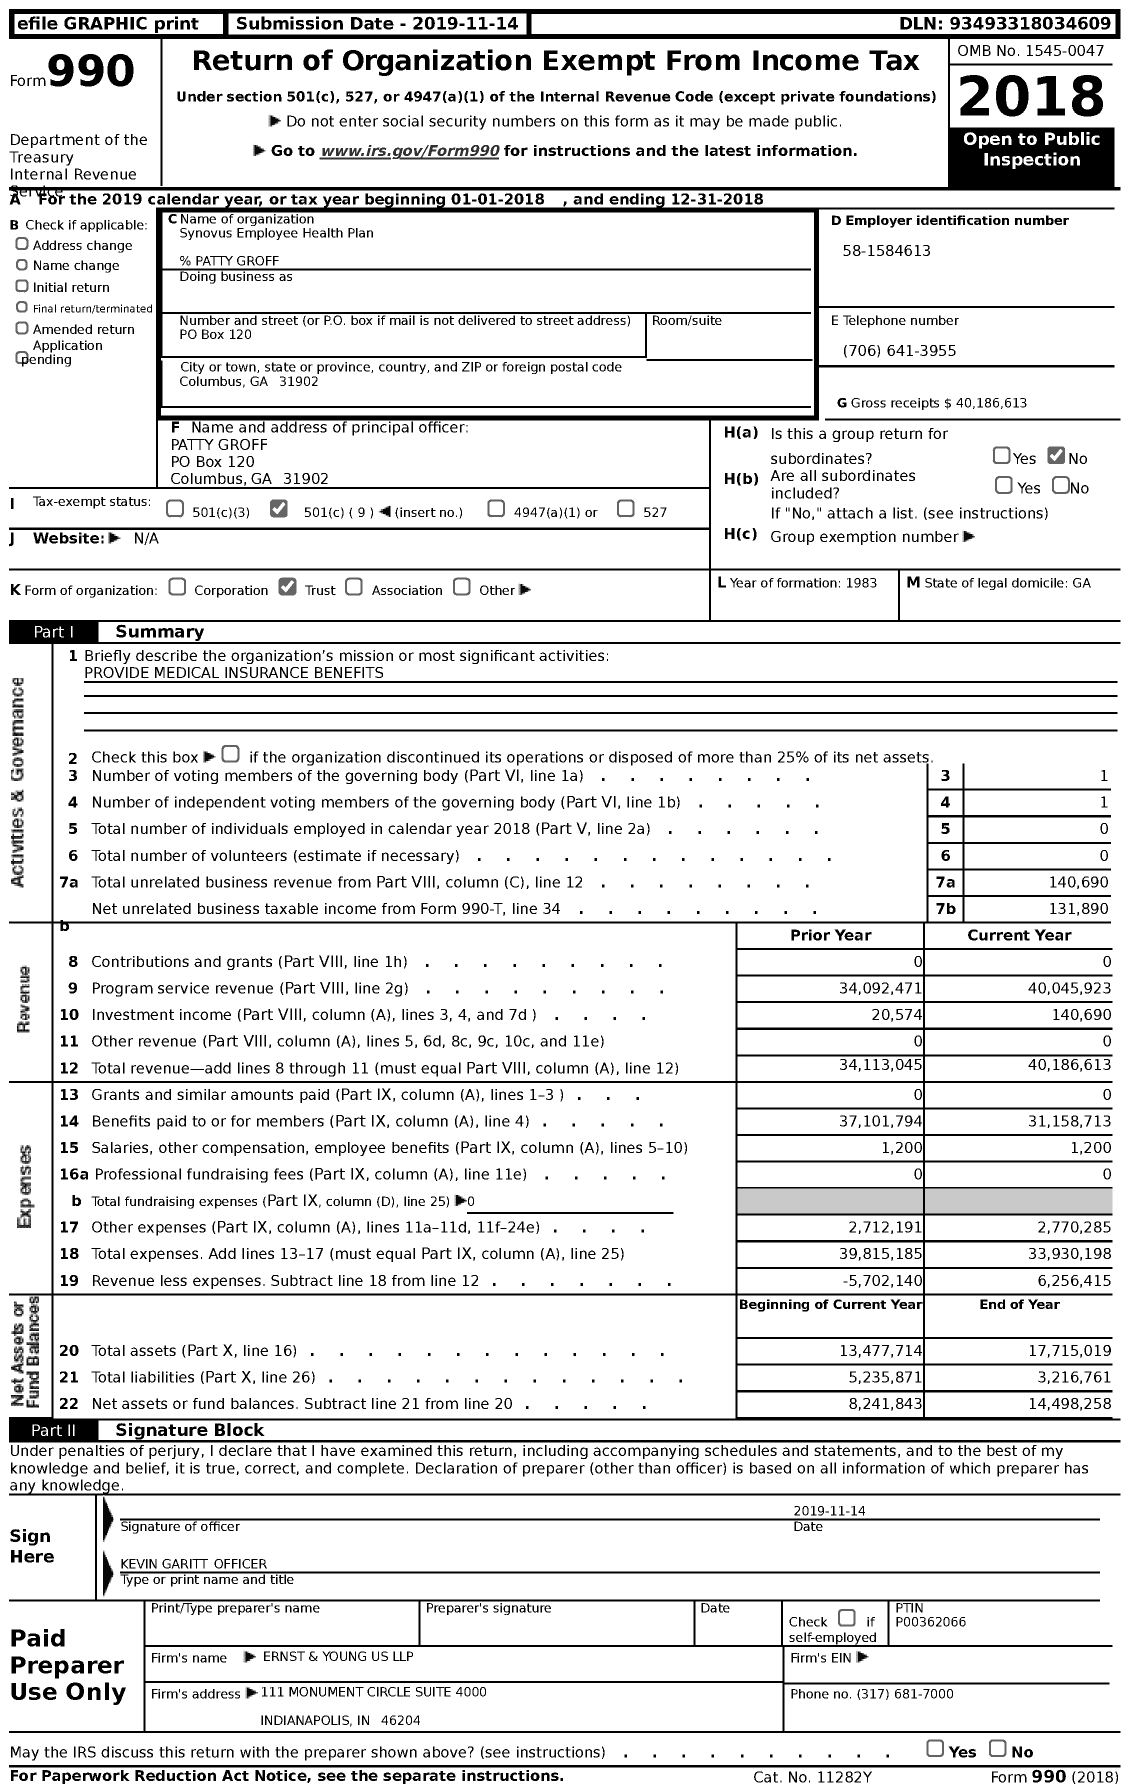 Image of first page of 2018 Form 990 for Synovus Employee Health Plan